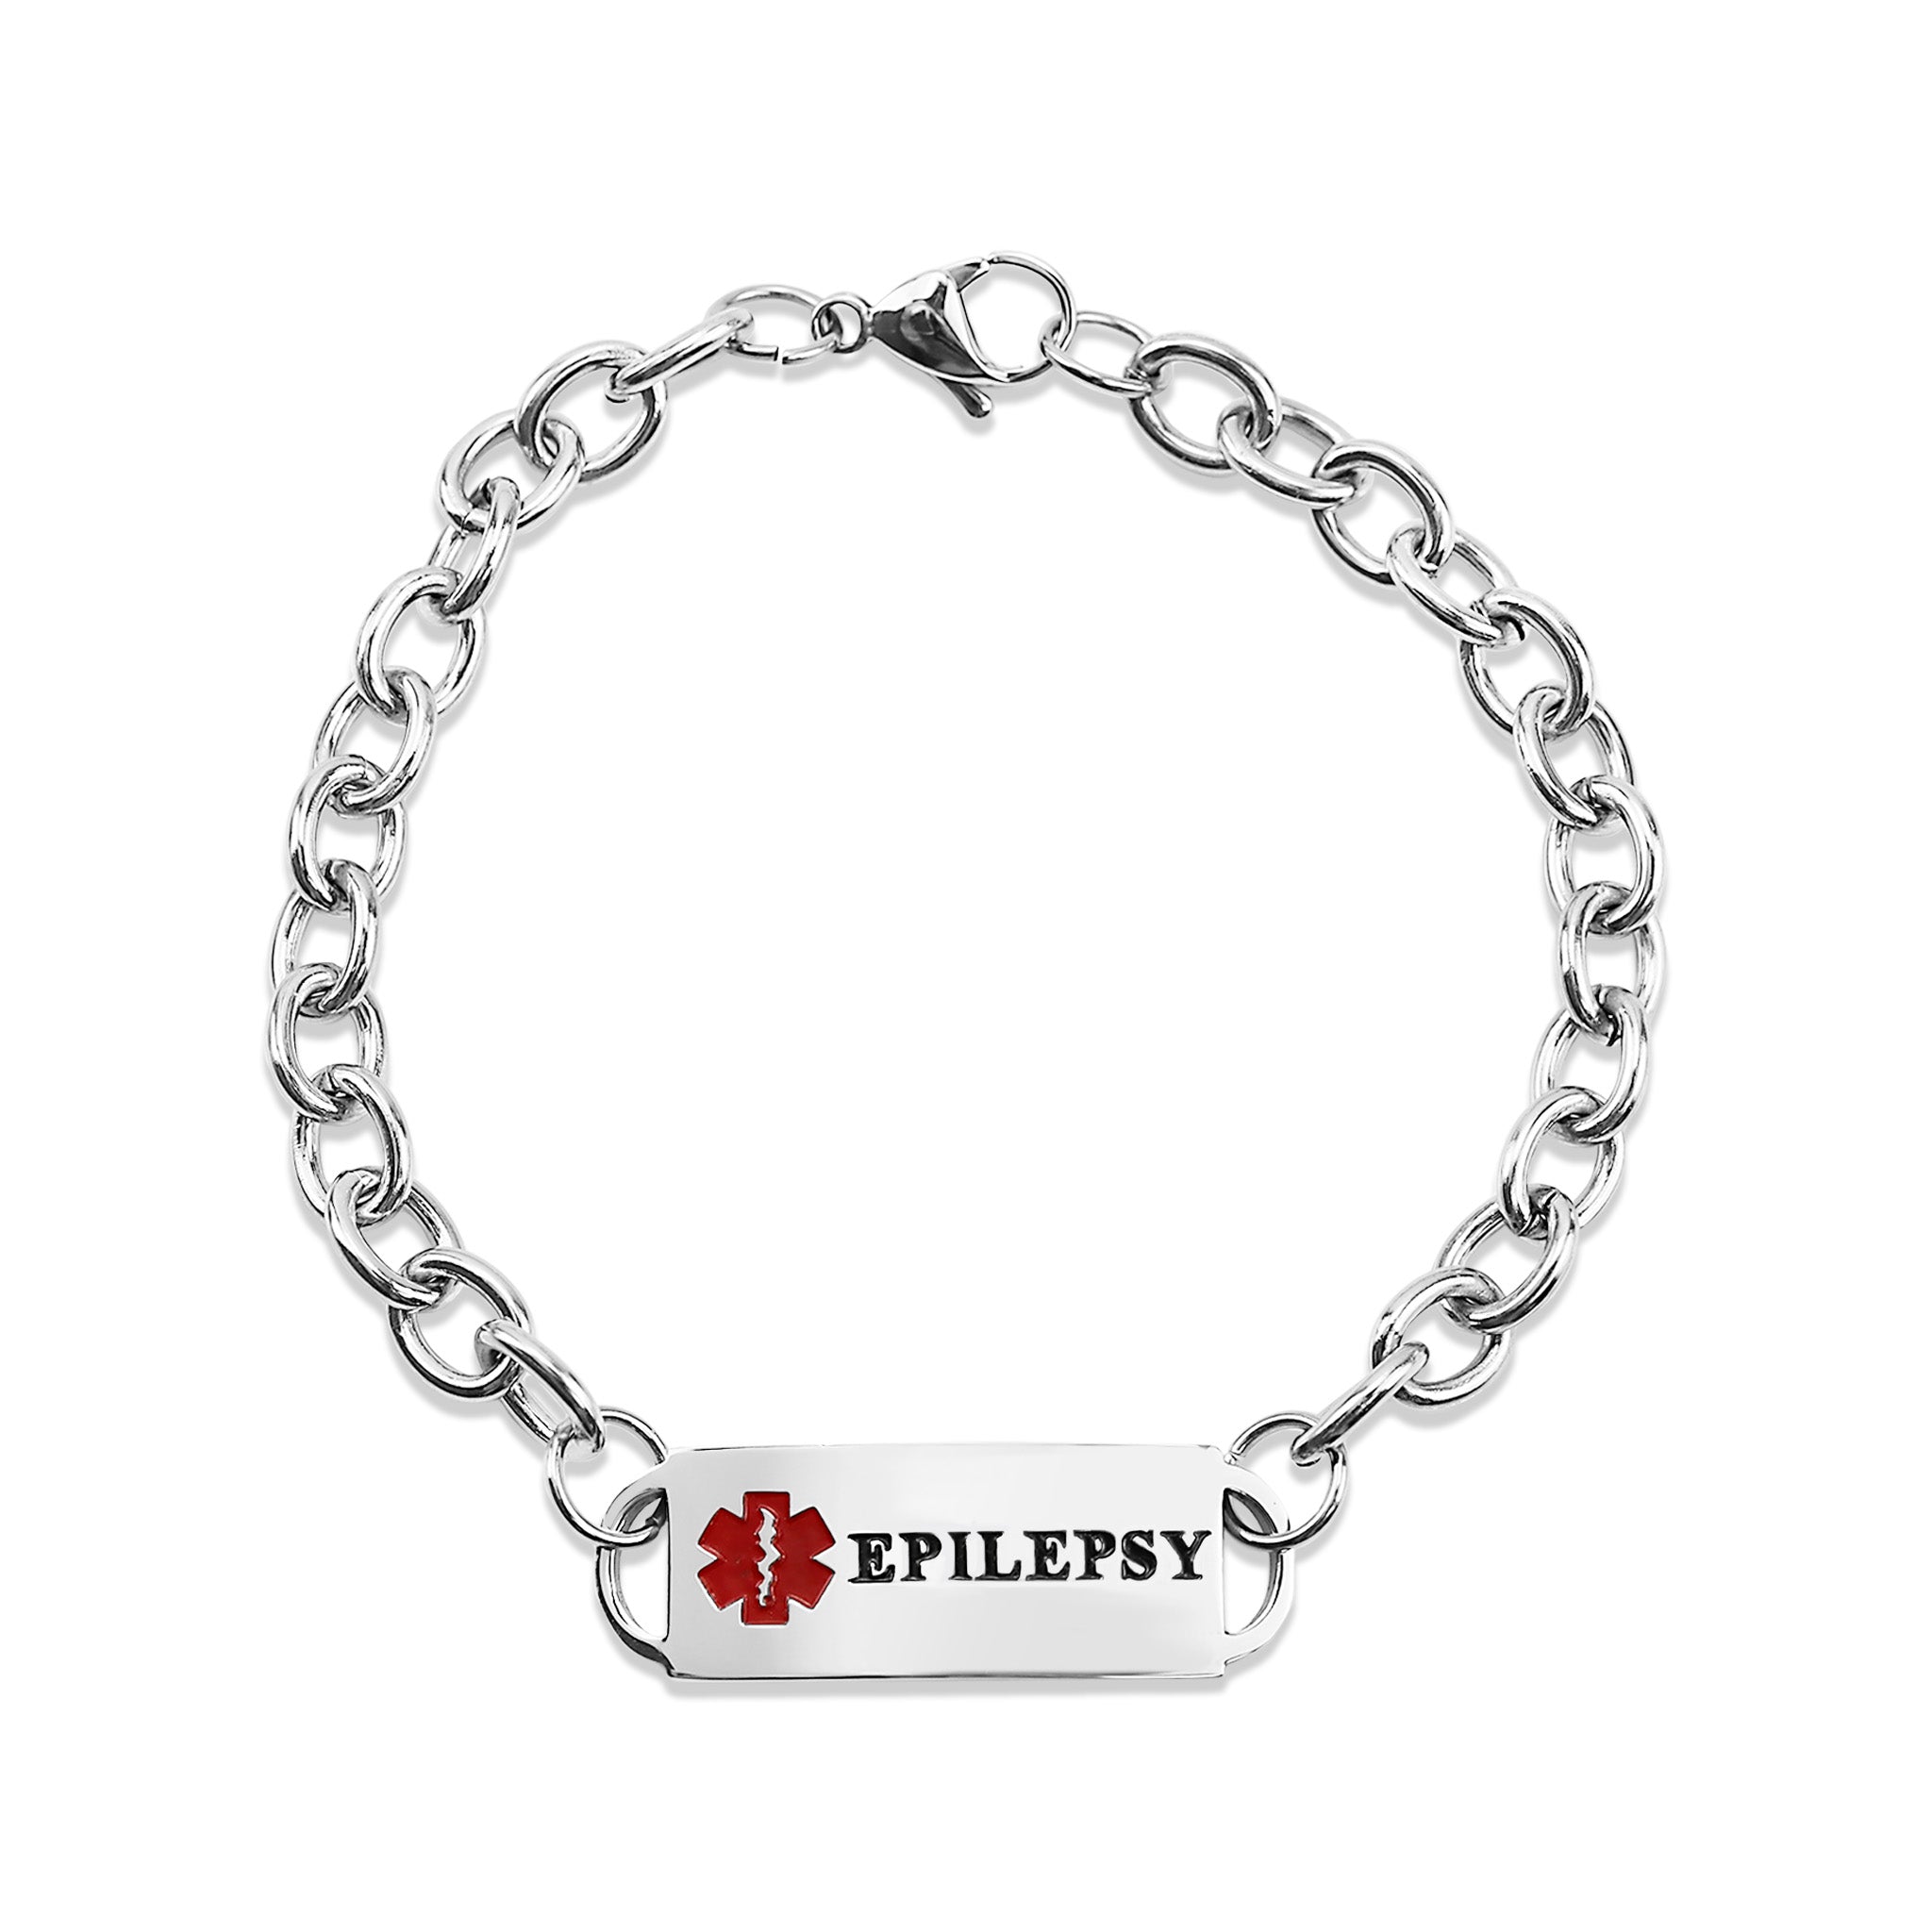 Four Reasons Why You Should Wear A Medical ID If You Have Epilepsy - Butler  and Grace Ltd